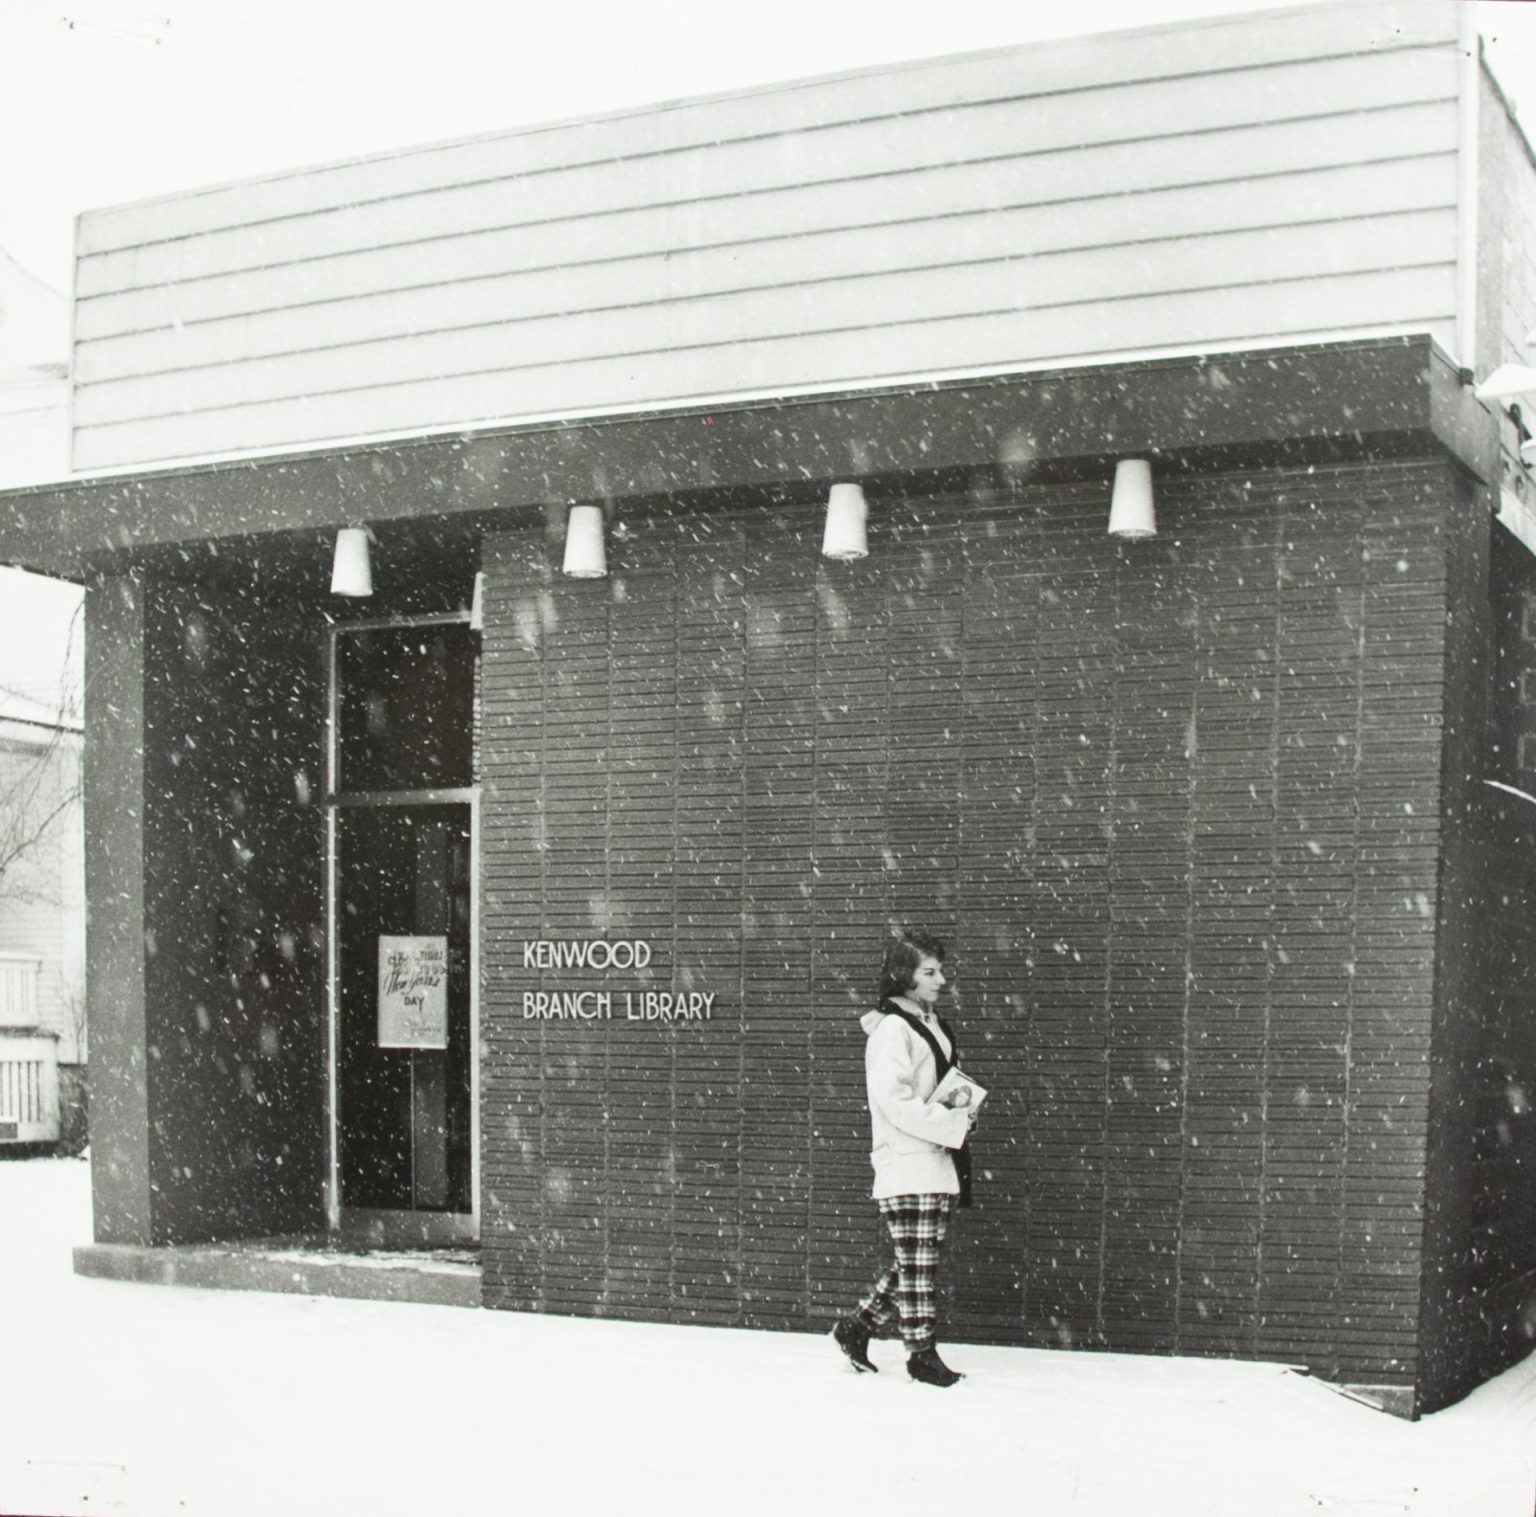 A woman in plaid pants and white coat carries a book in the snow in front of the brick Kenwood Branch.